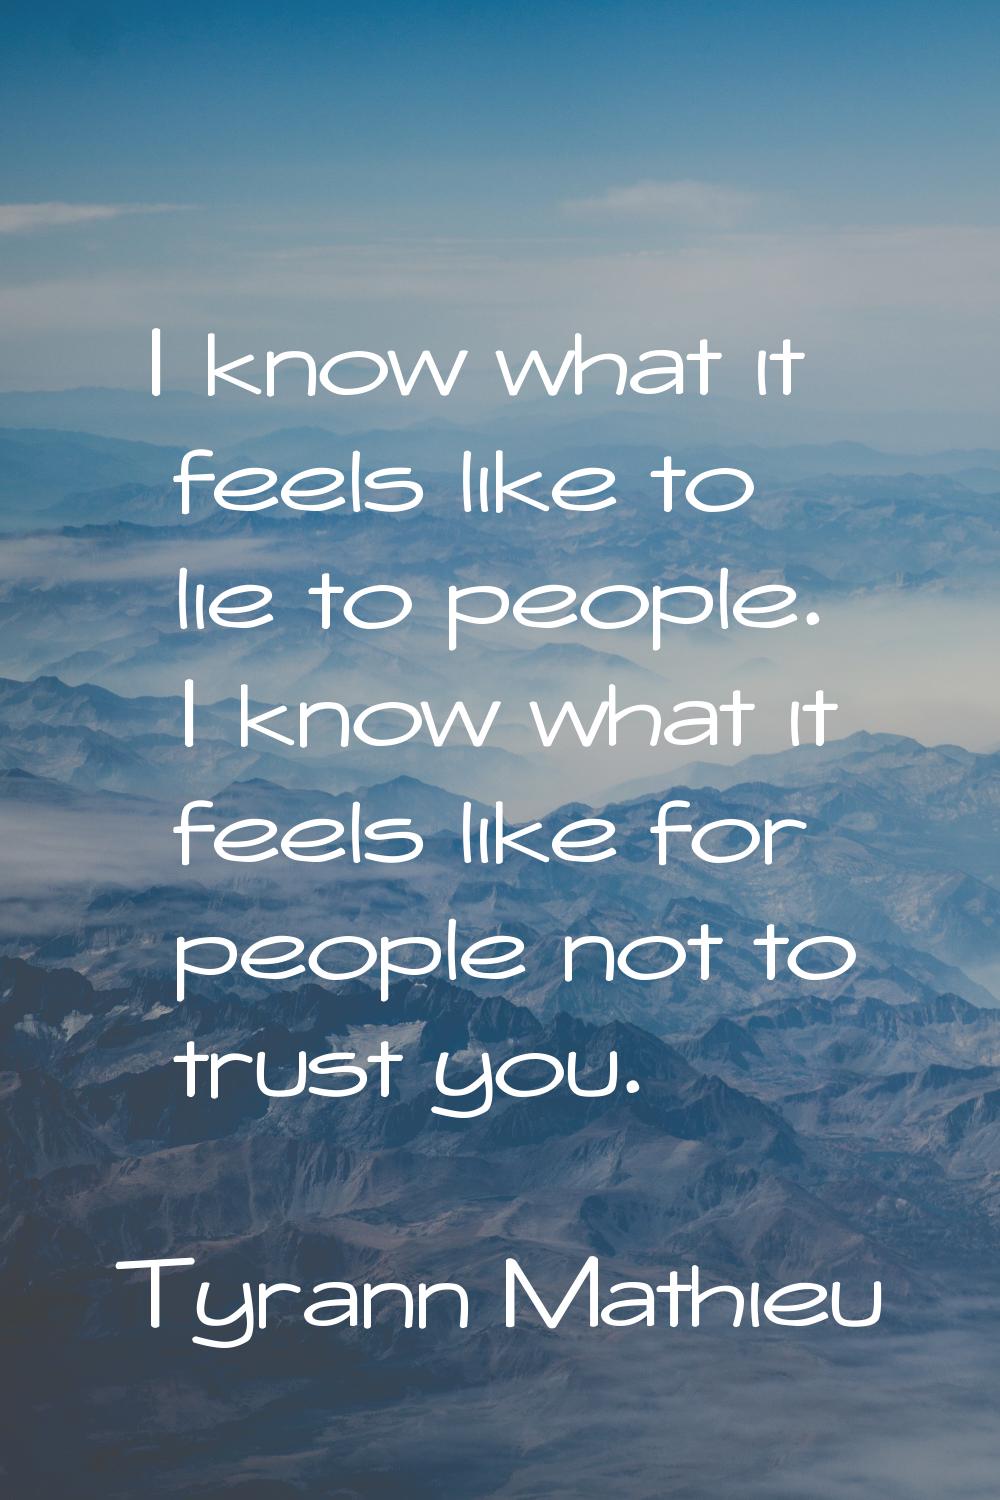 I know what it feels like to lie to people. I know what it feels like for people not to trust you.